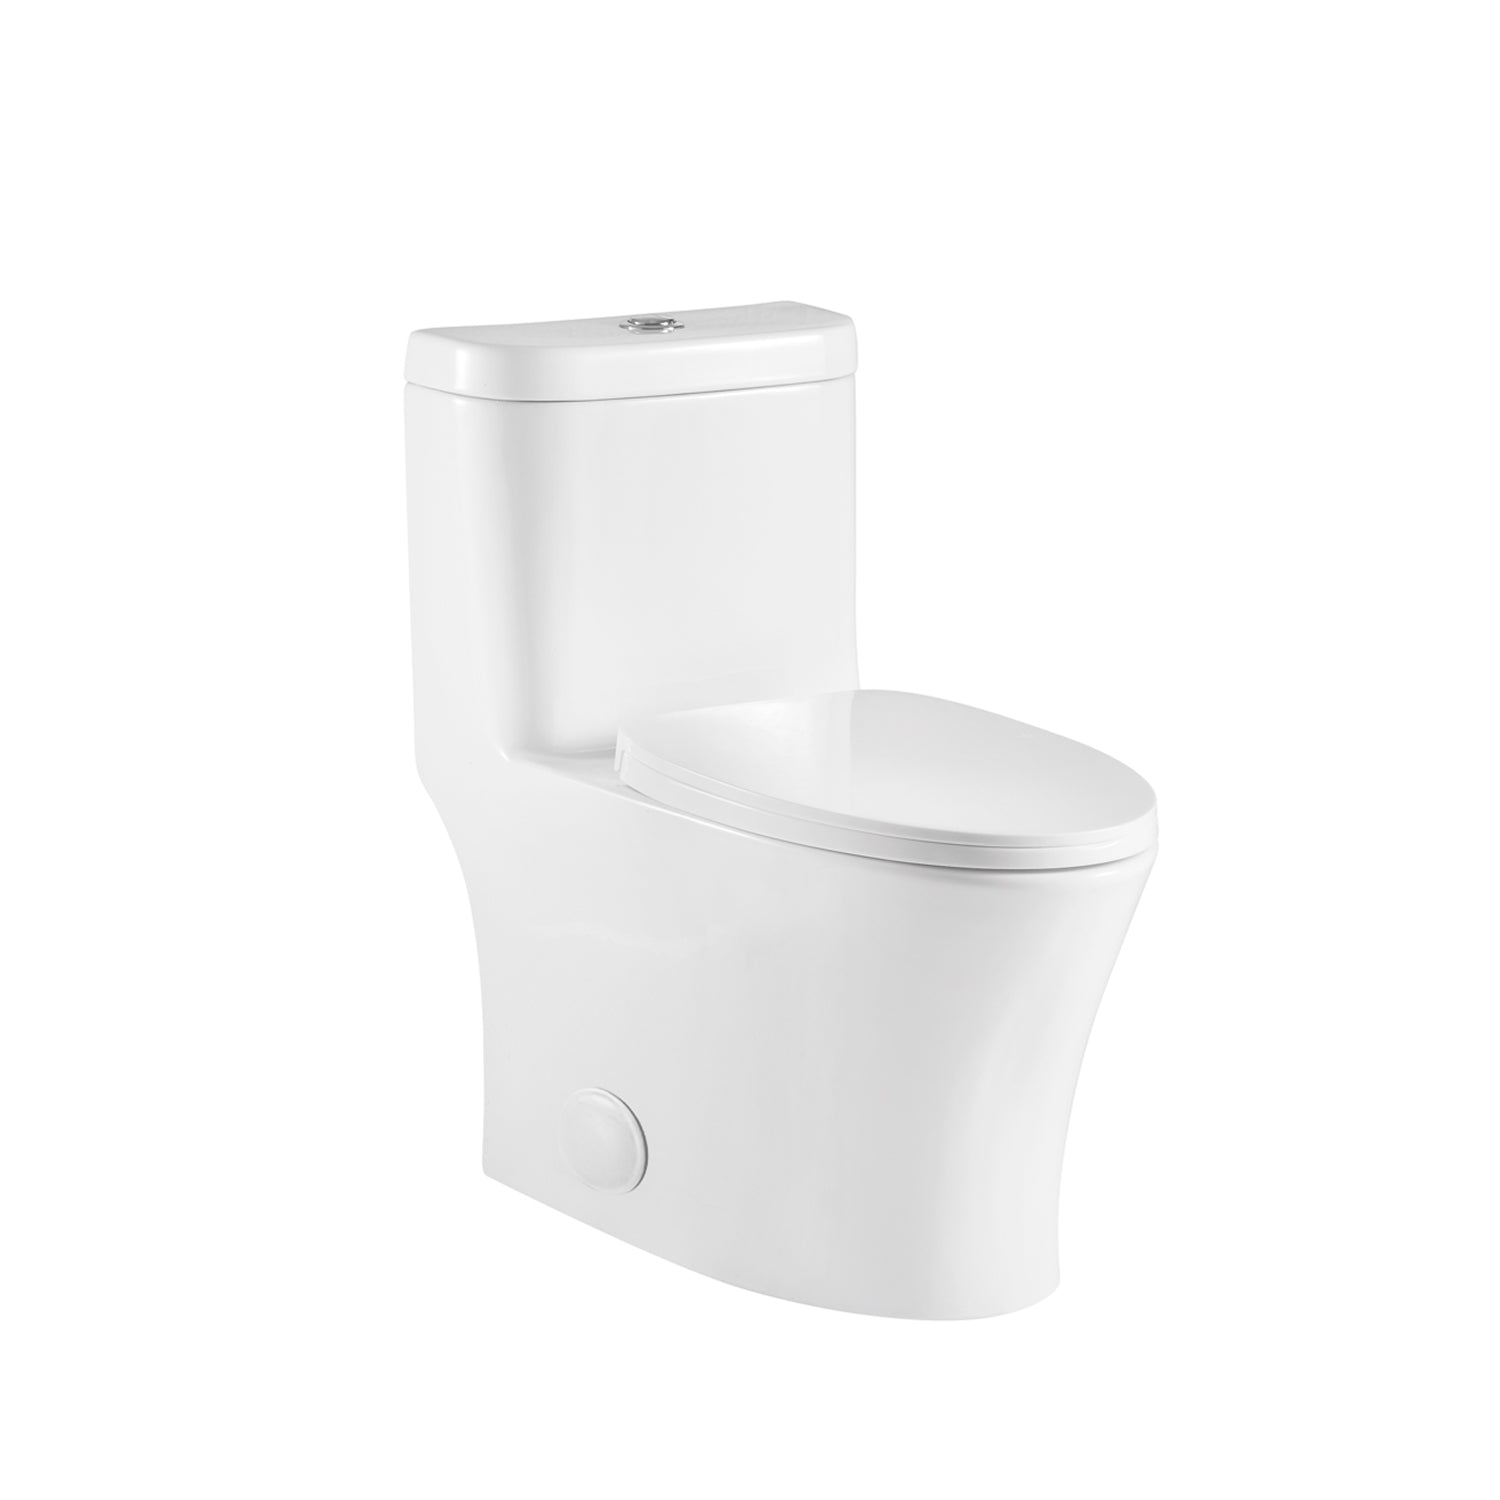 DAX One Piece Oval Toilet with Soft Closing Seat and Dual Flush High-Efficiency, Porcelain, White Finish, Height 29-3/4 Inches (BSN-CL12243)